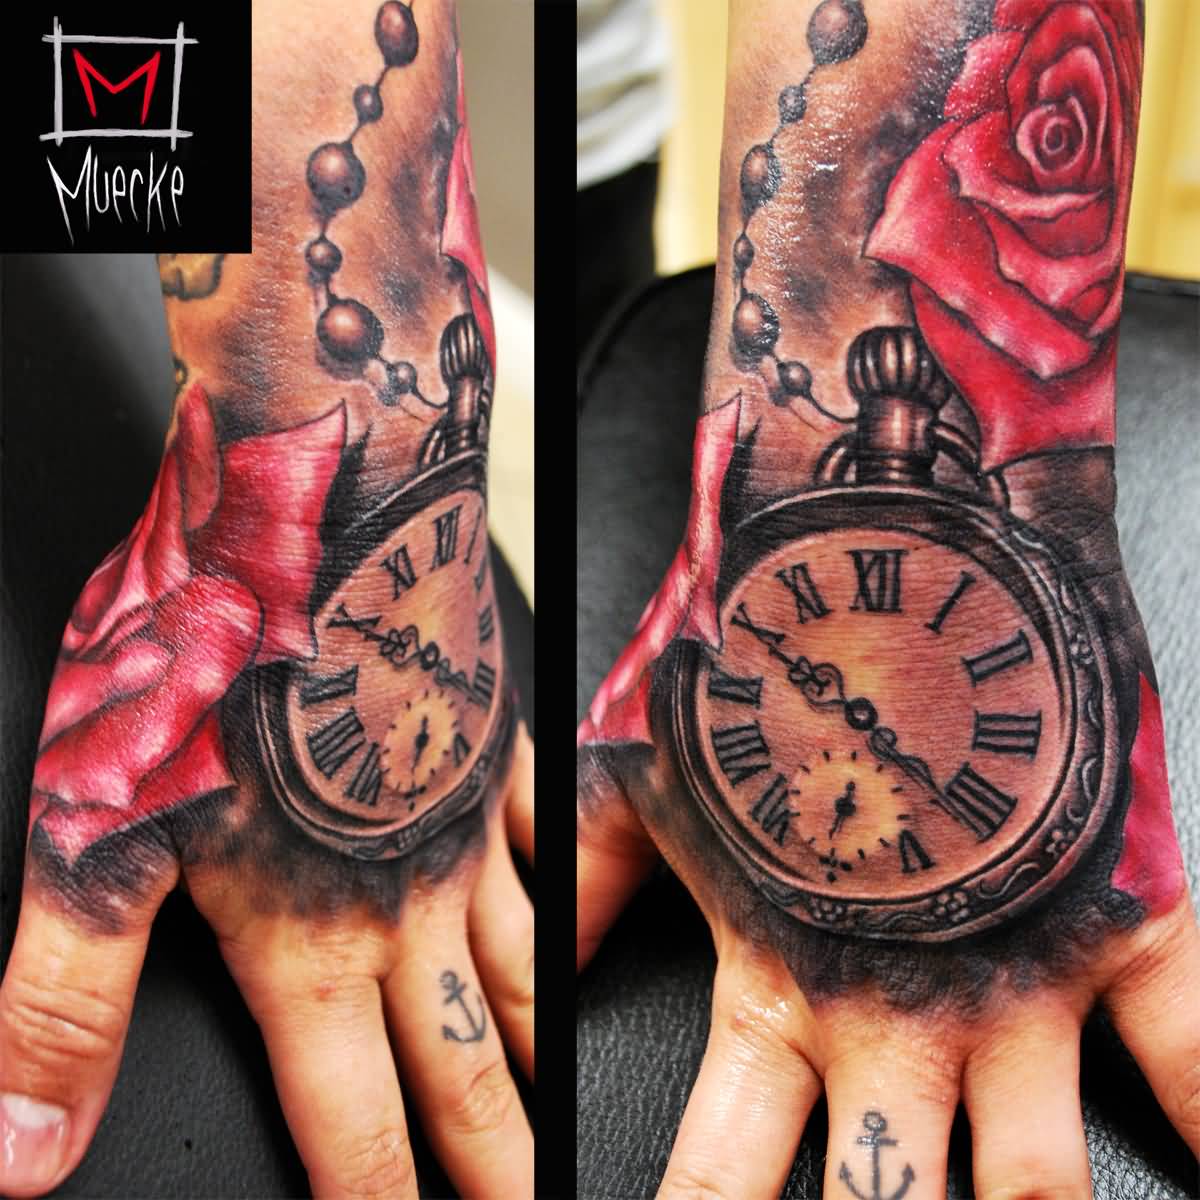 Clock And Rose Tattoo On Hand